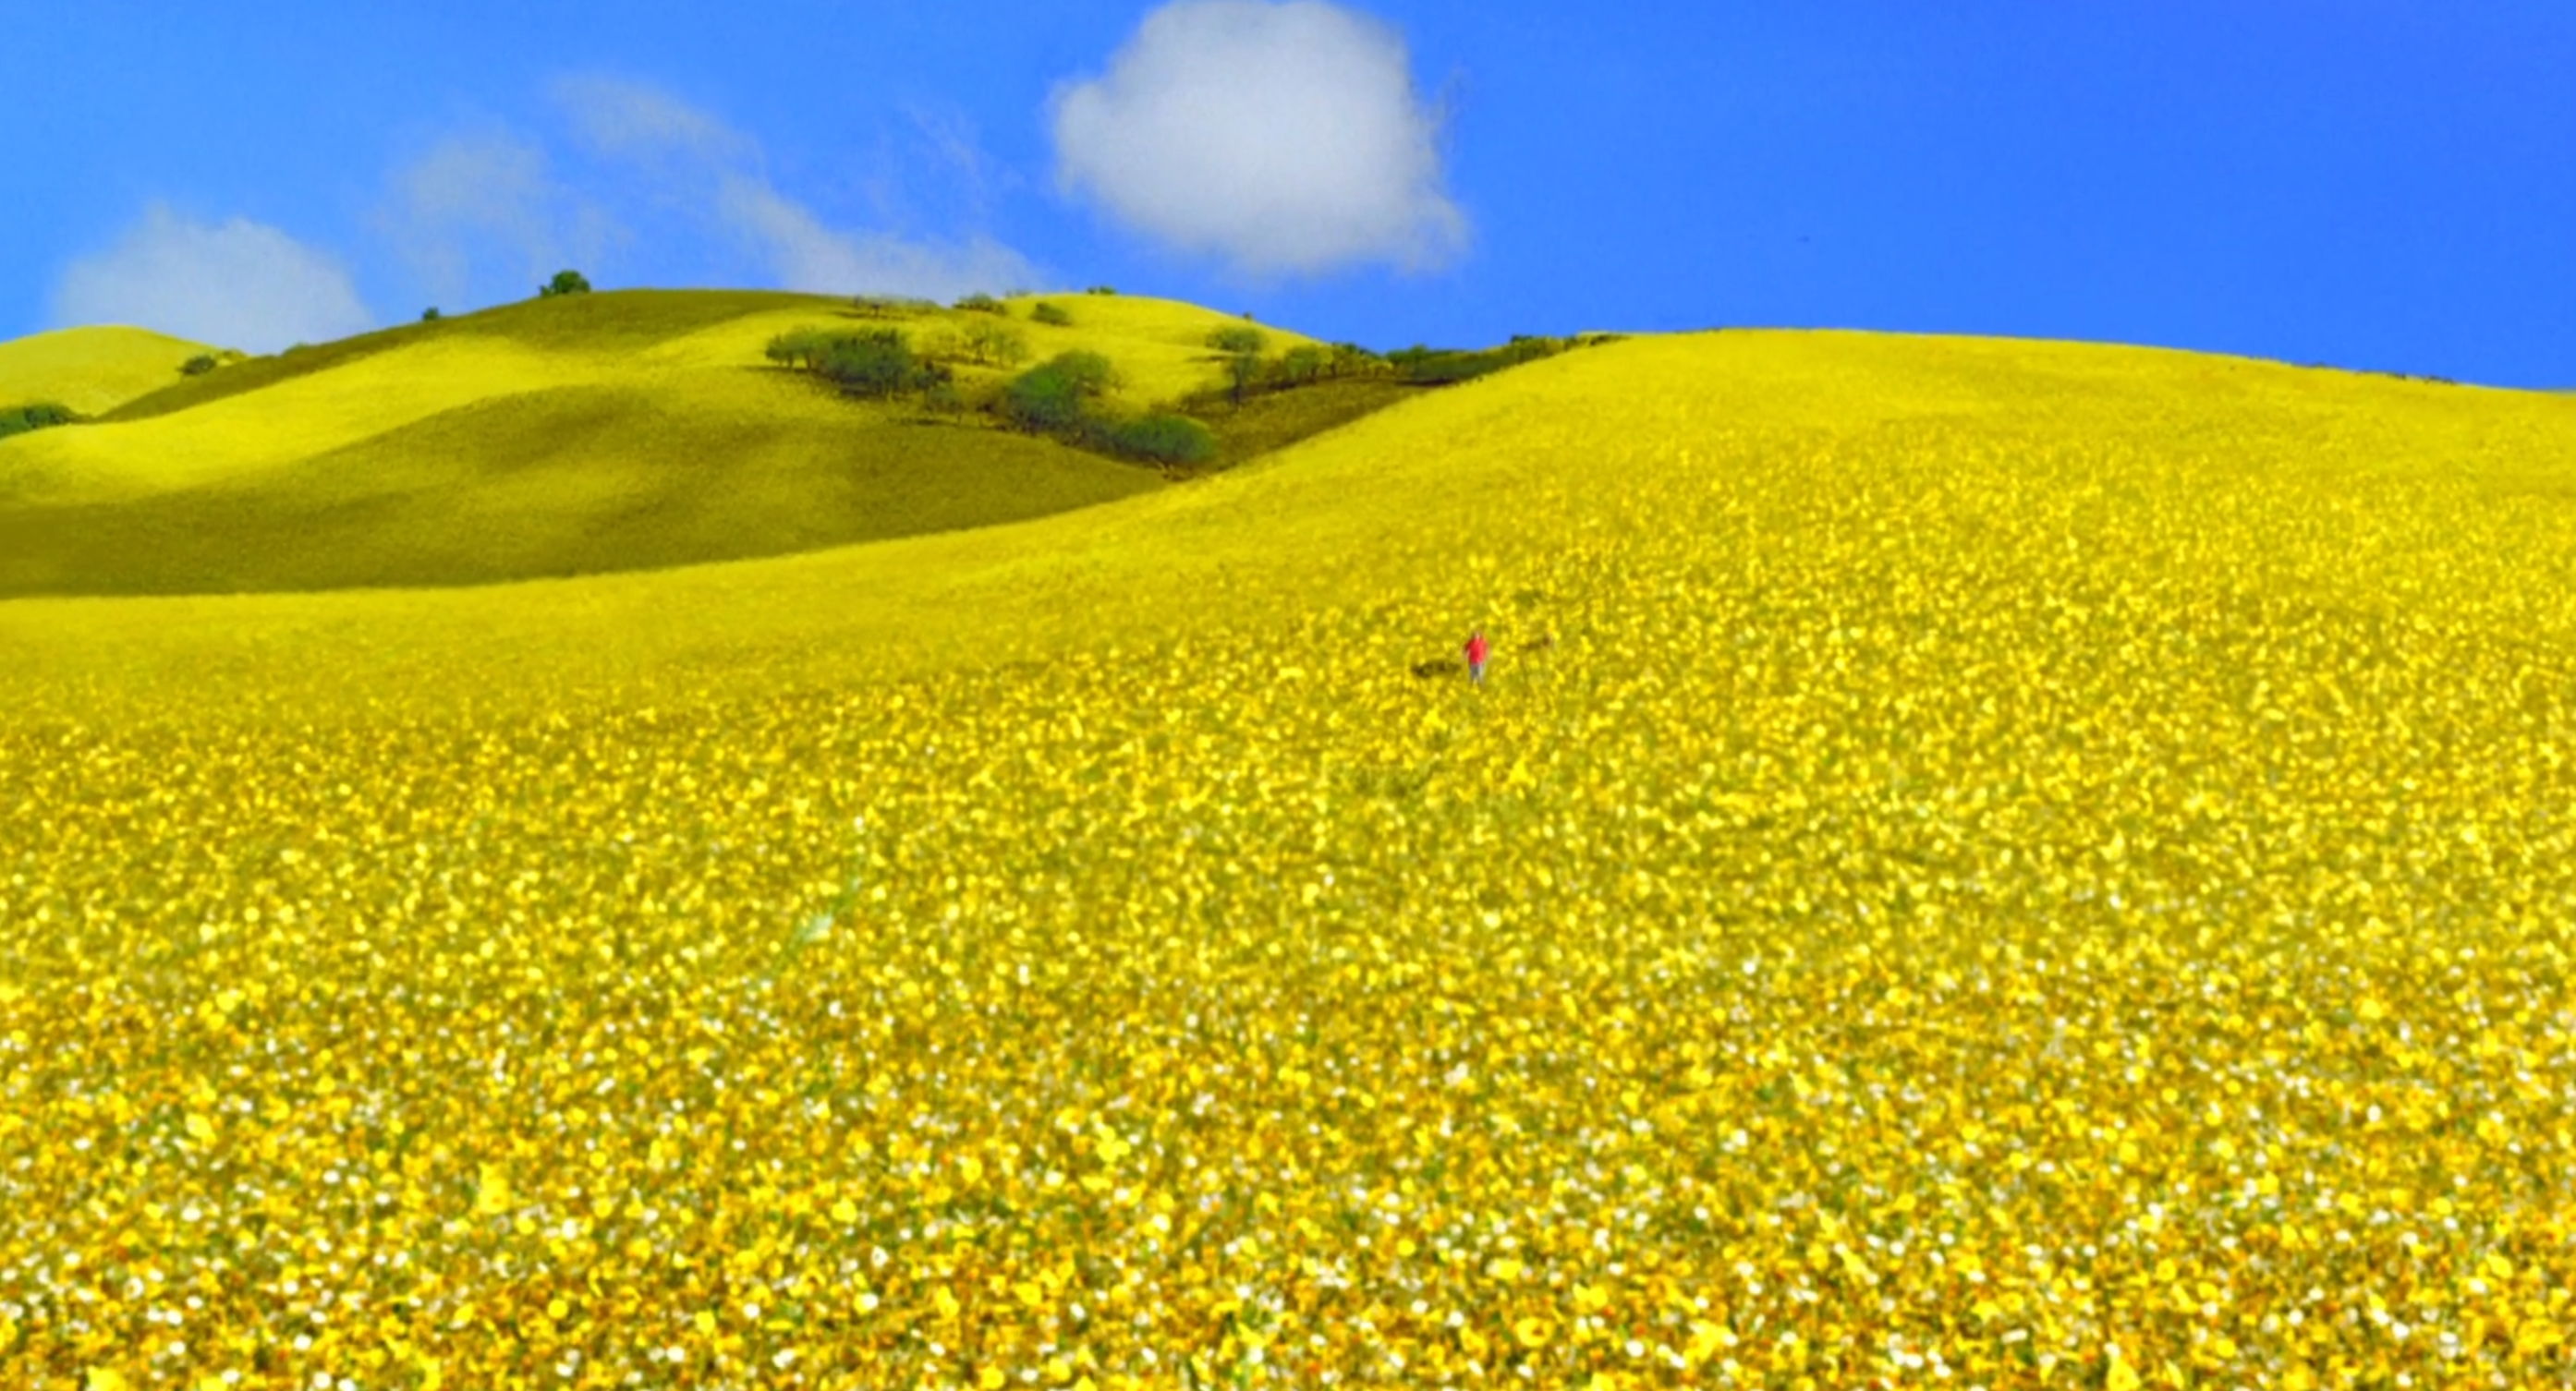 A bright yellow field of daisies under a bright blue sky. 

Pushing Daisies. Season 1, Episode 1: "Pie-Lette." 2007-2009. ABC.